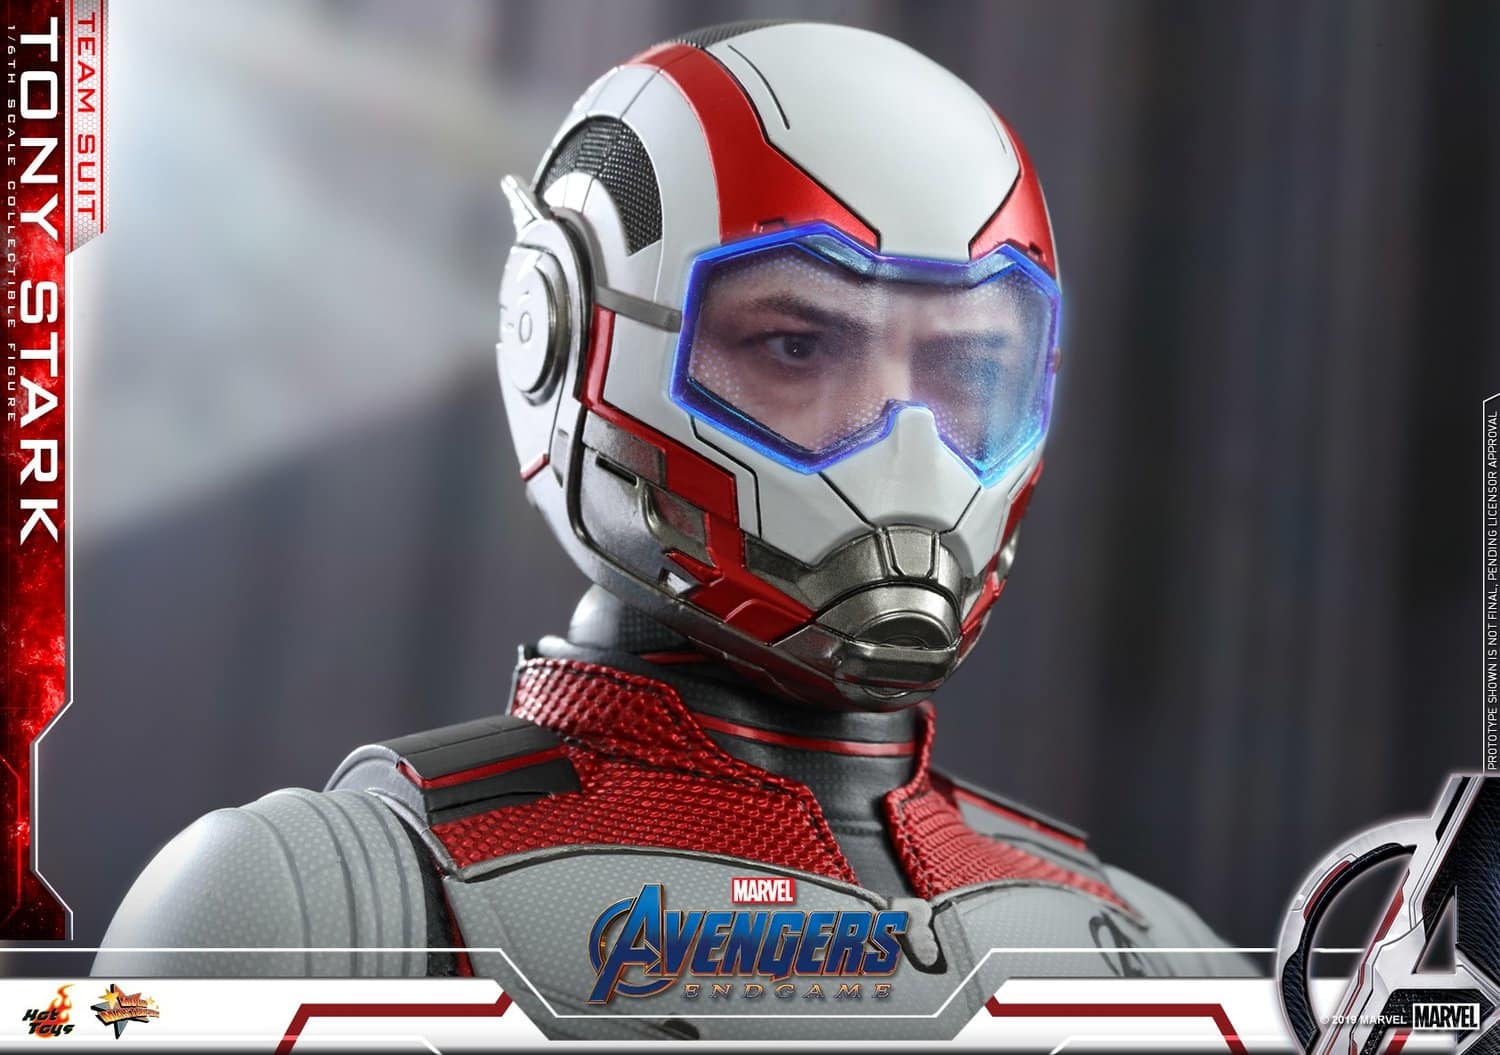 The helmet of the quantum suits clearly reminds one of the Ant-Man helmet. 